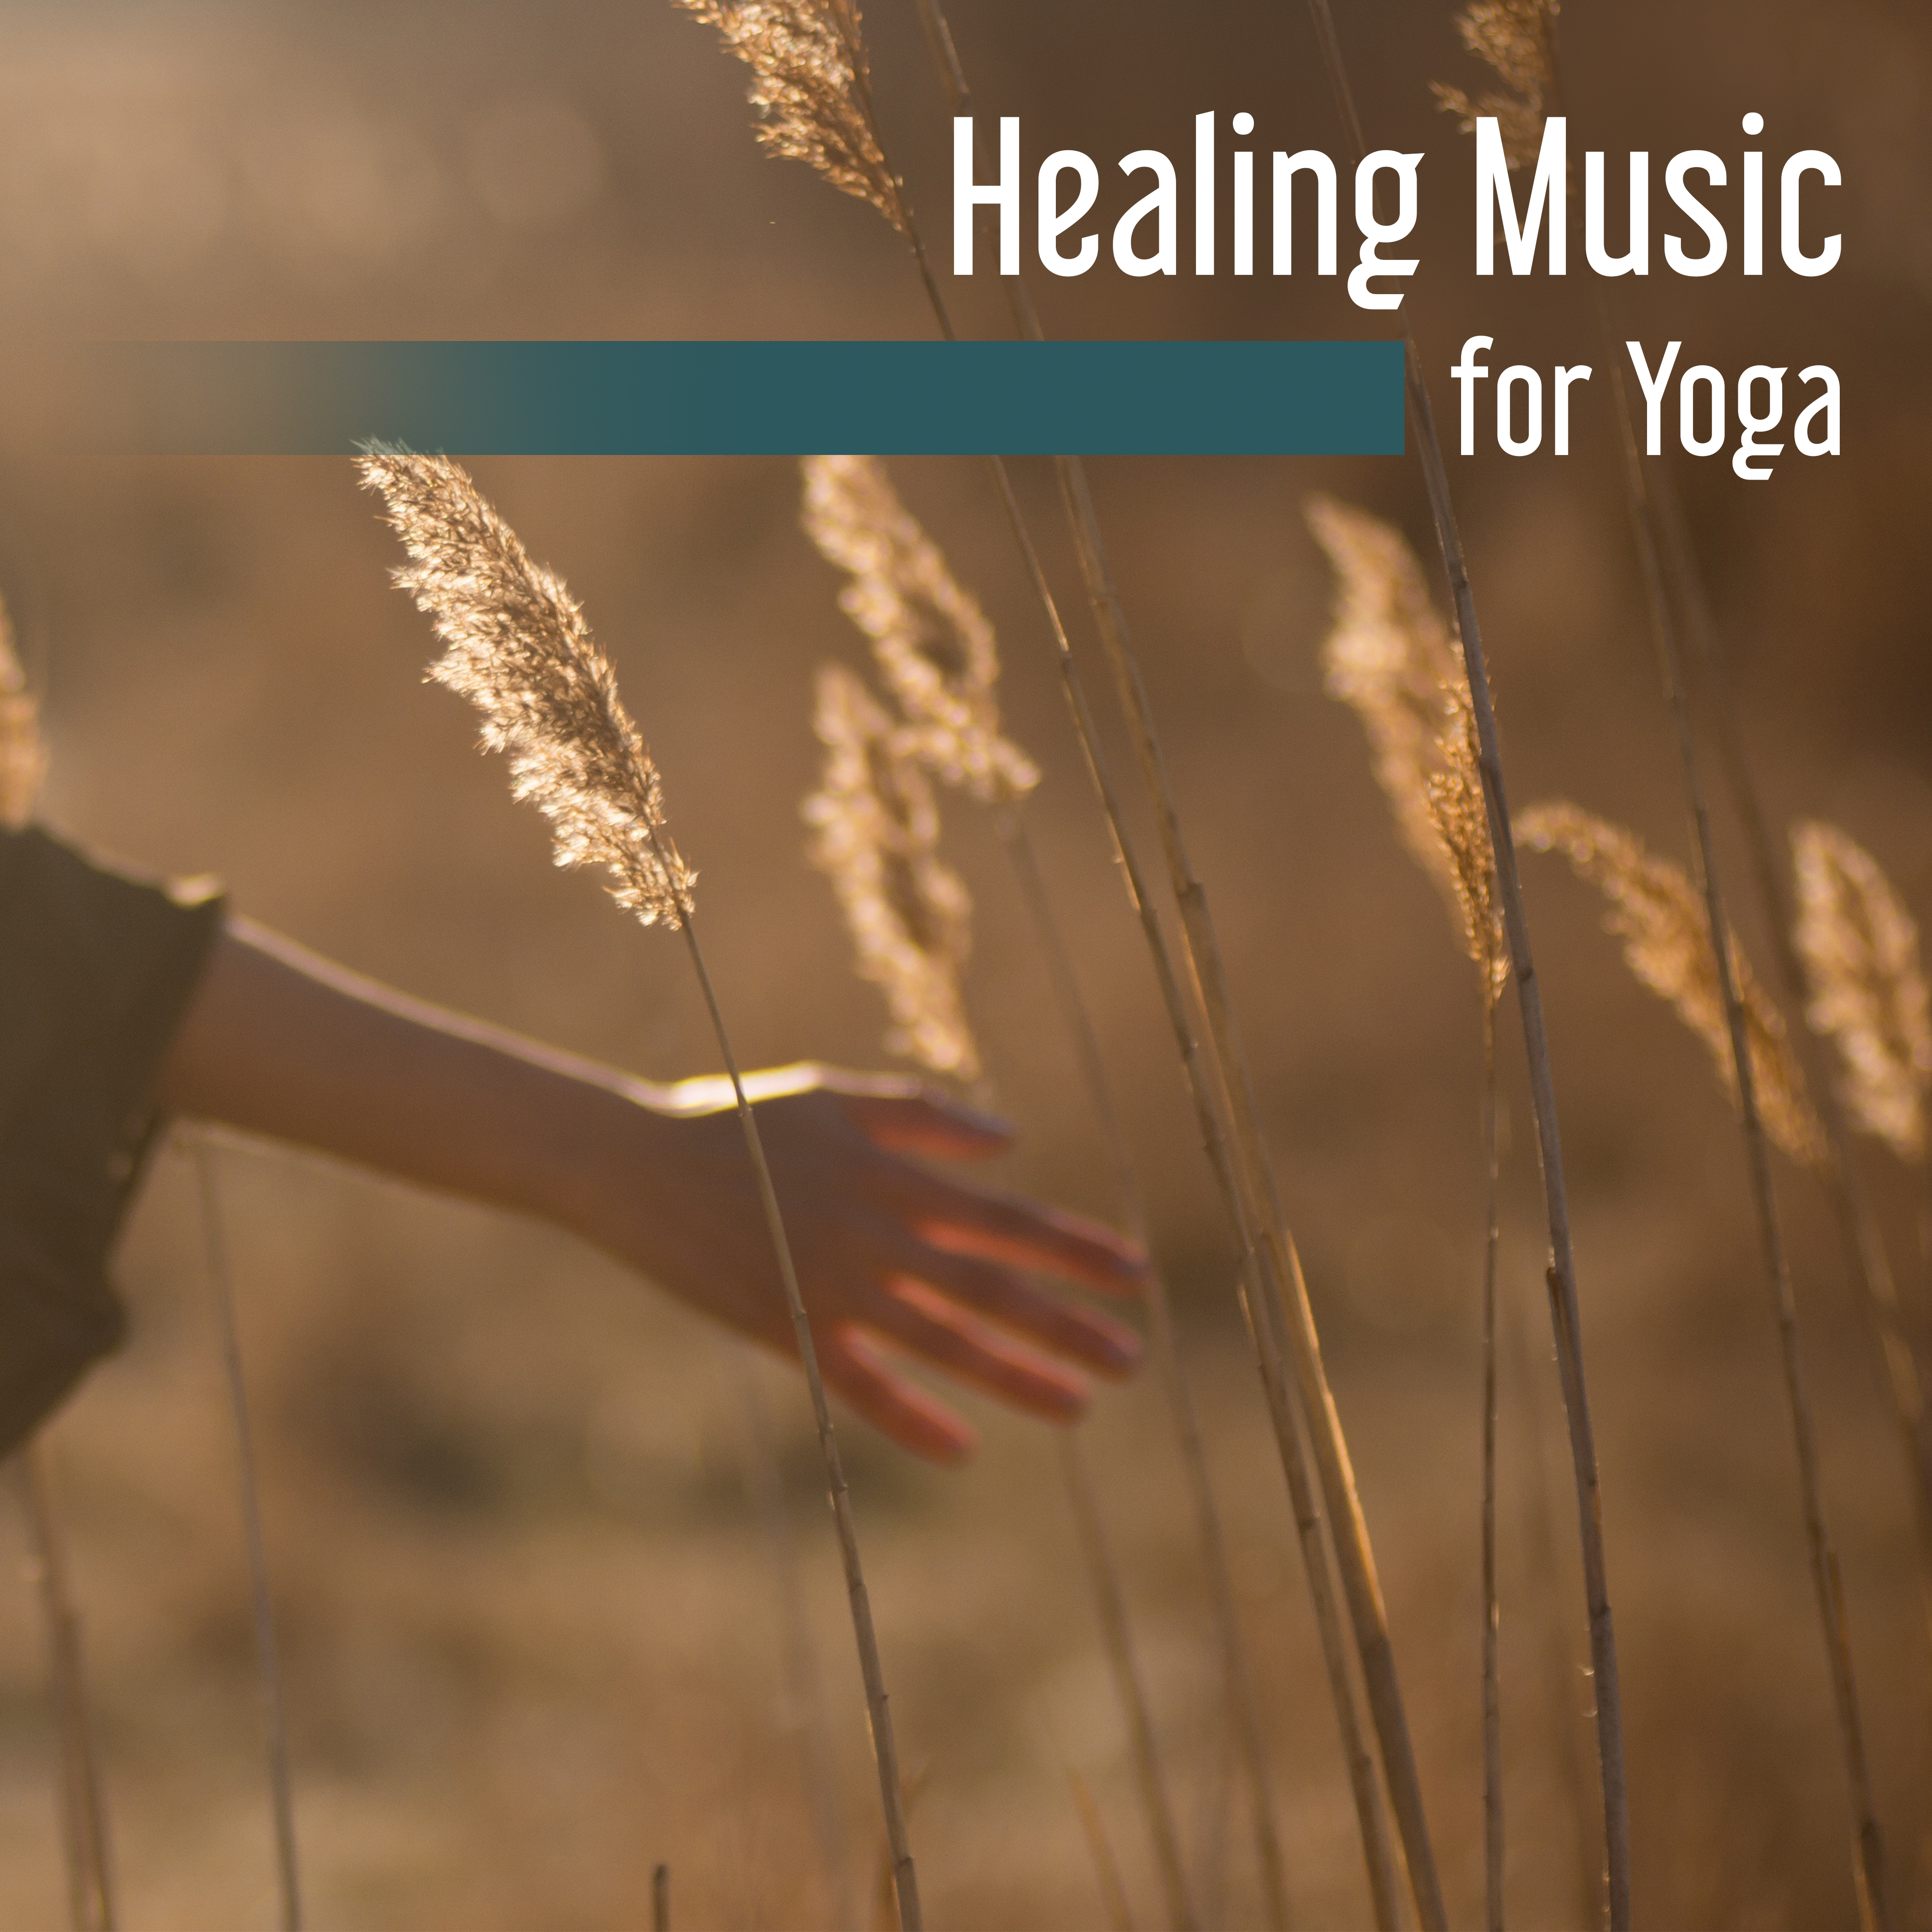 Healing Music for Yoga  Train Your Mind, Better Concentration, Calming Melodies for Meditation, Zen, Focus, Nature Sounds